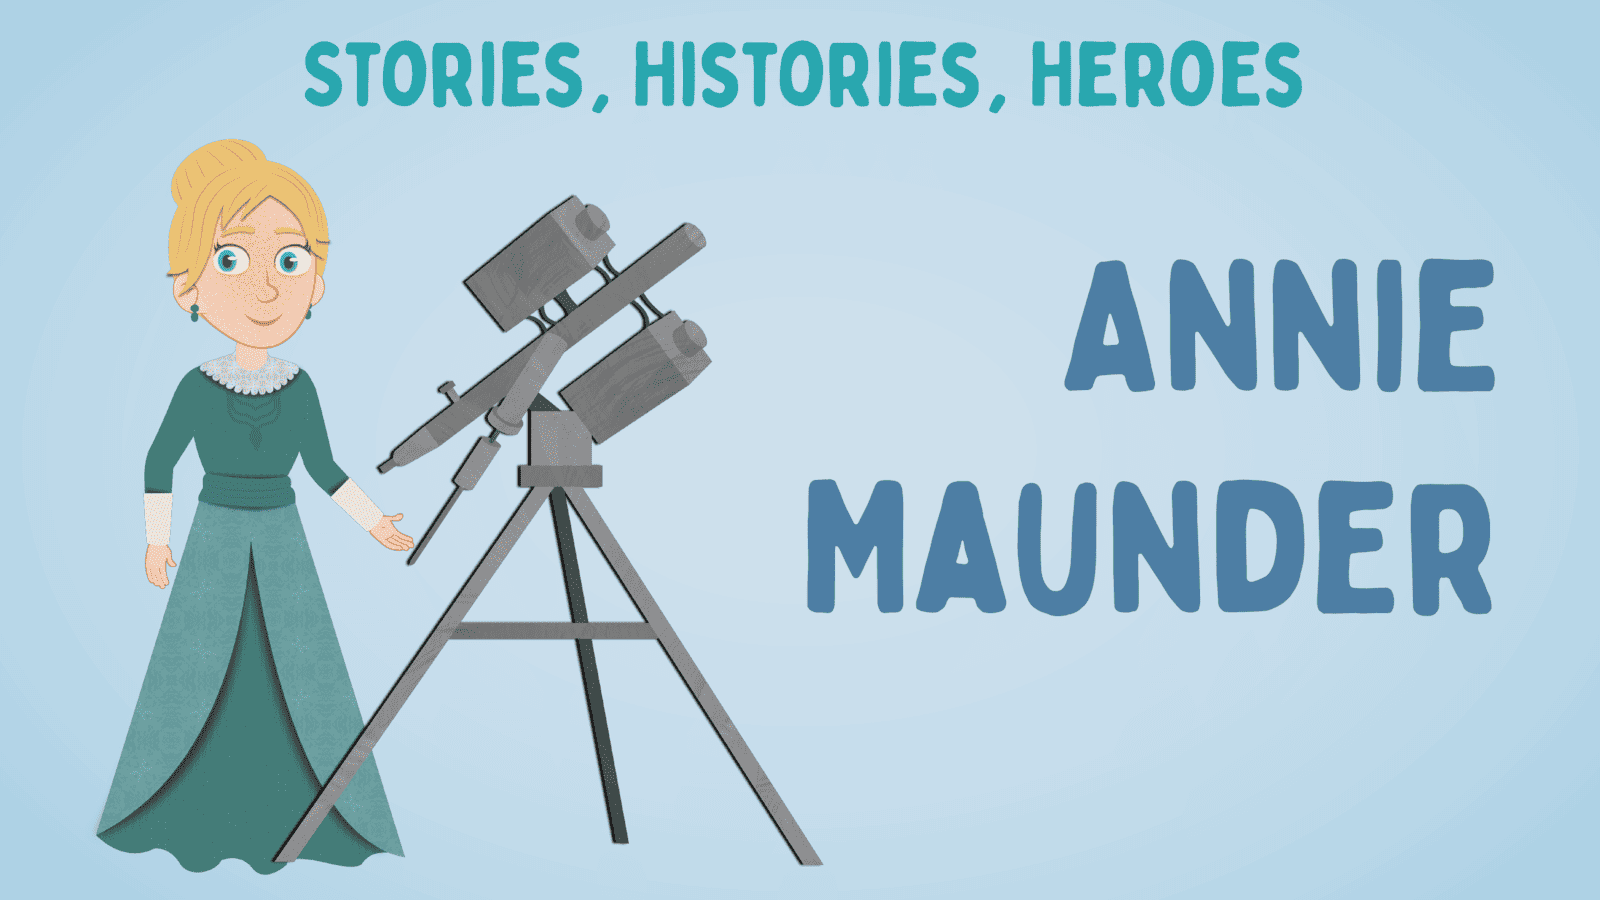 Annie Maunder: The Amazing Ulster-Scots Innovator- What is a sunspot?